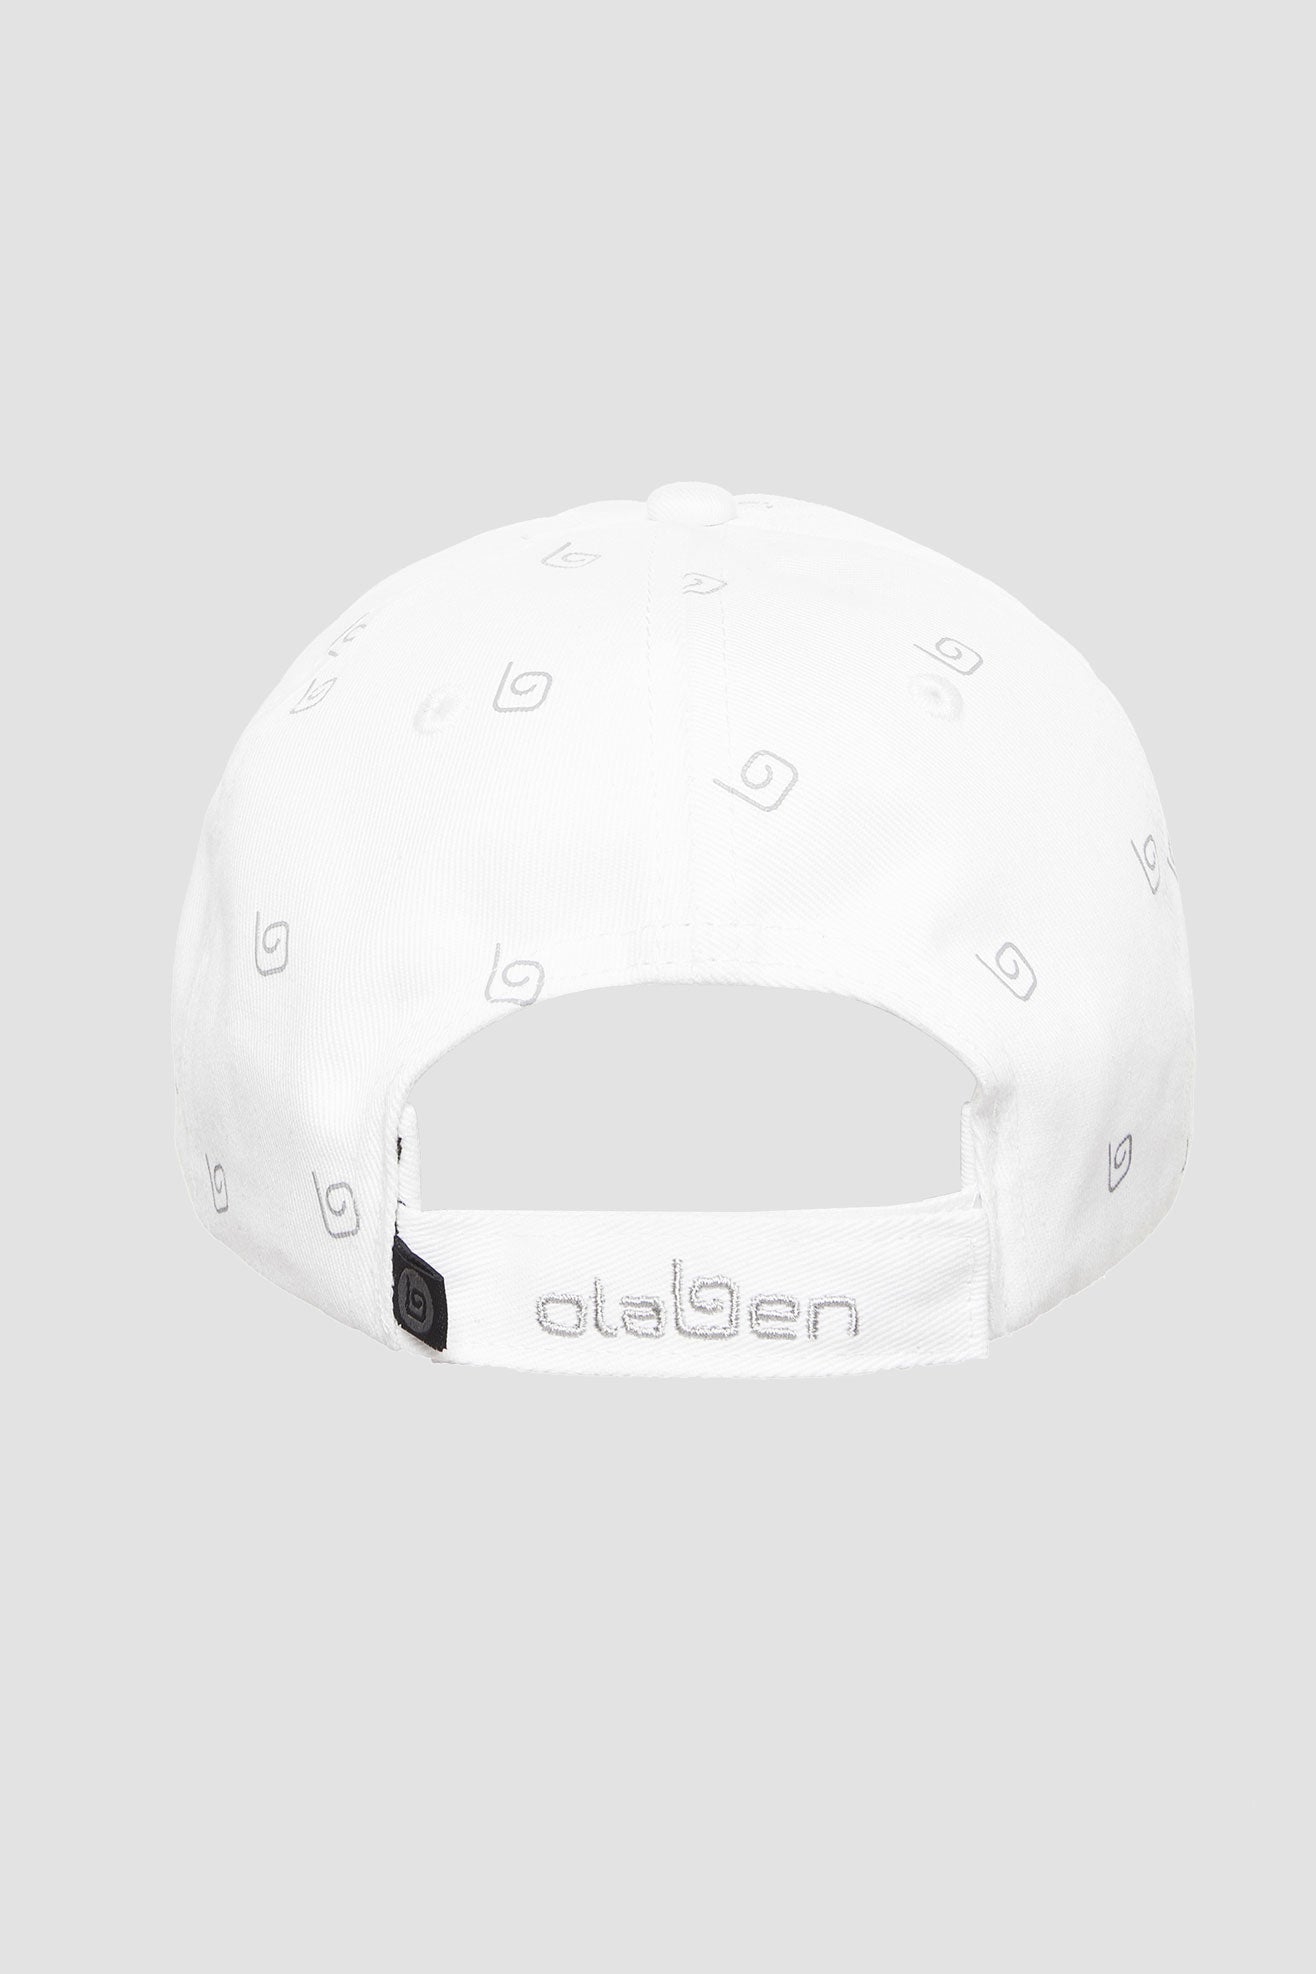 White monogram cap with Olaben logo, perfect headwear accessory for a stylish look.